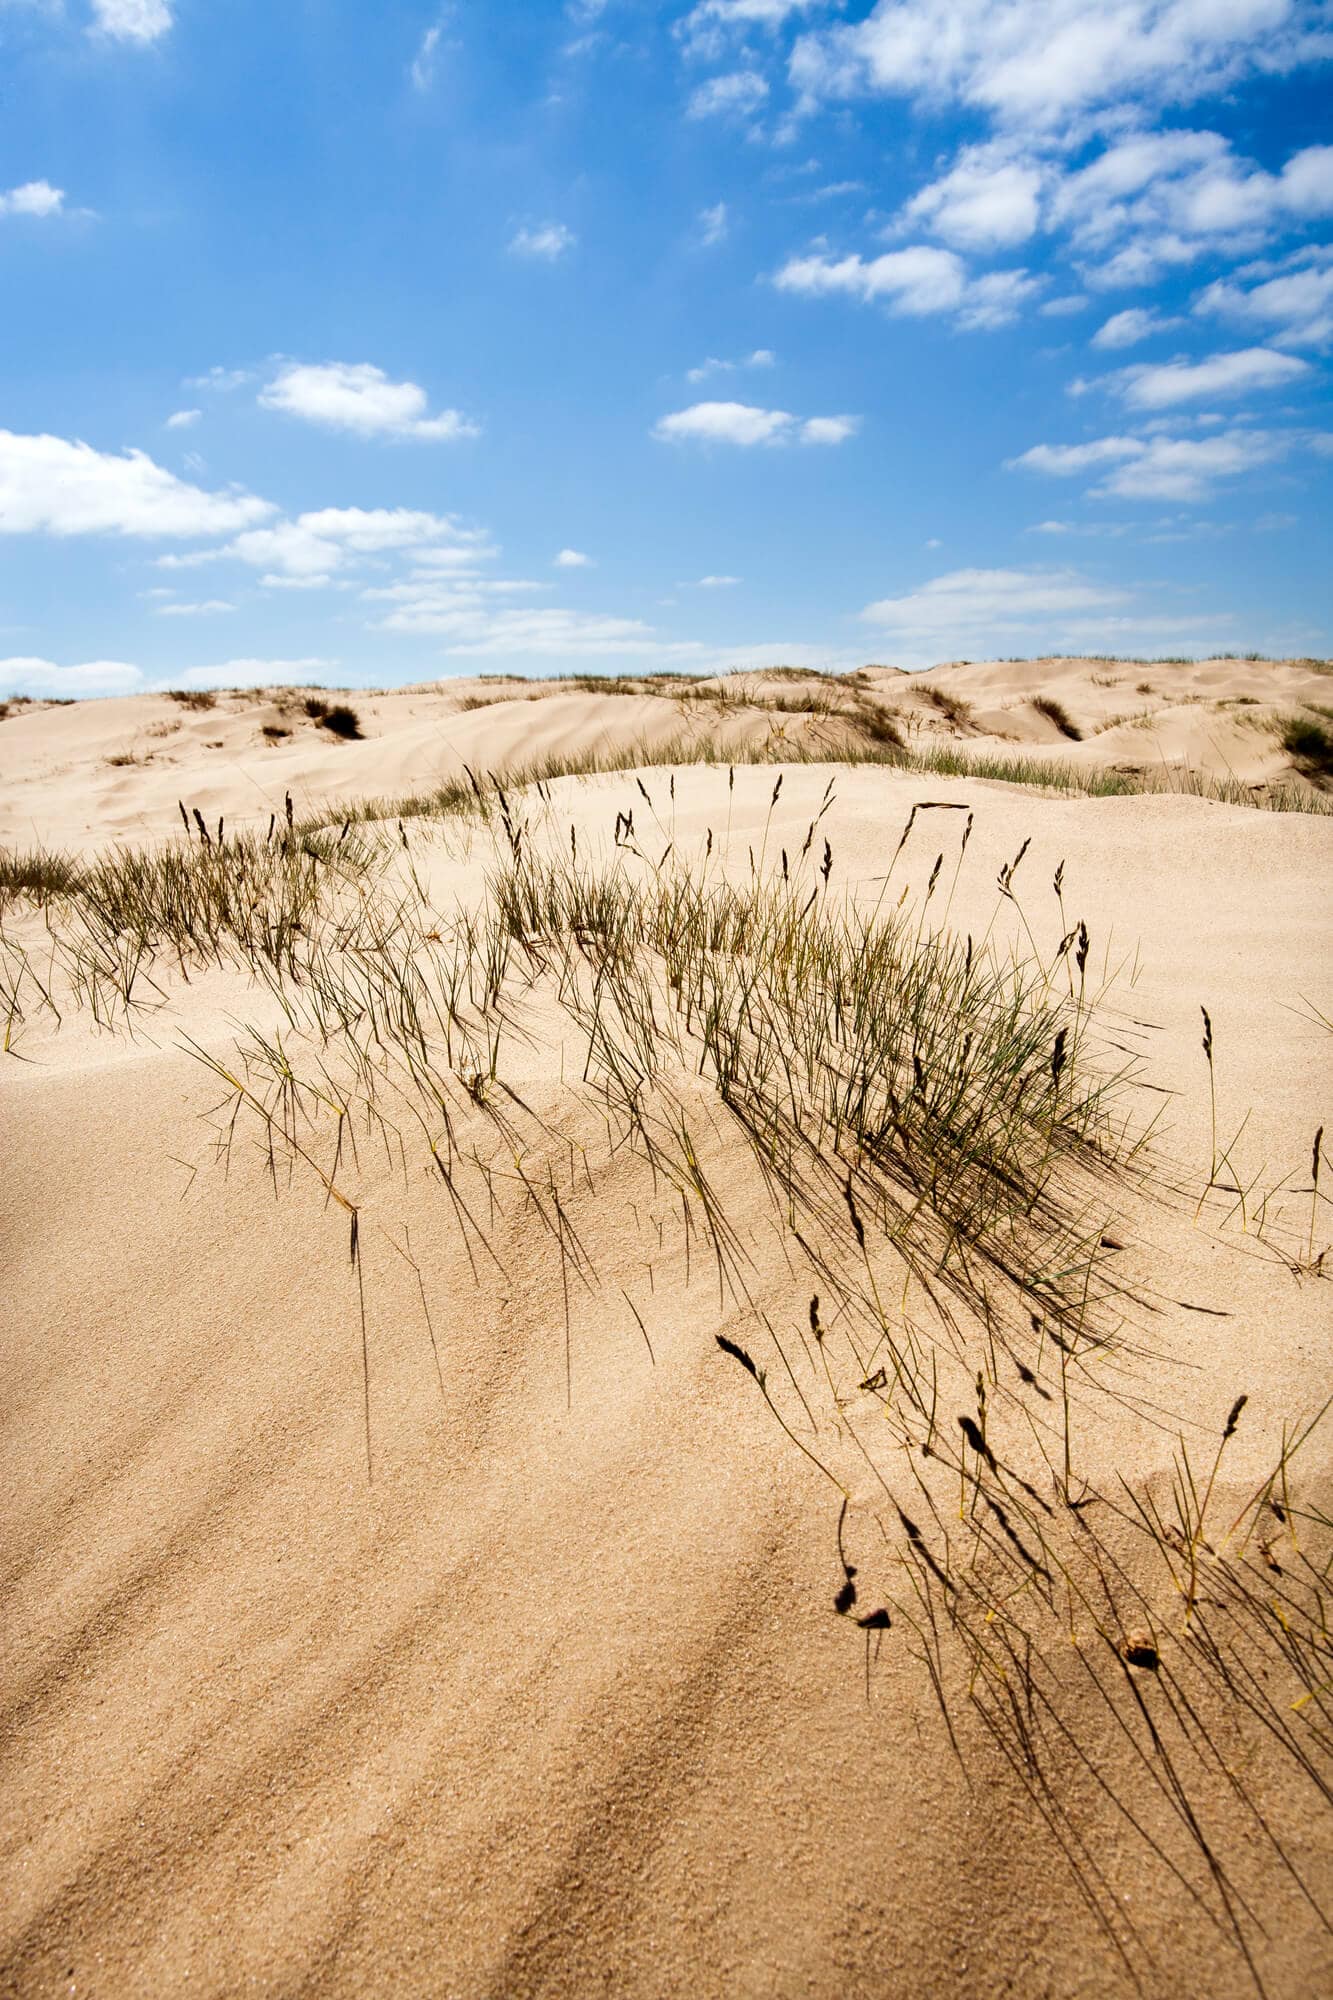 A large sand dune with grass growing in patches and a bright blue sky